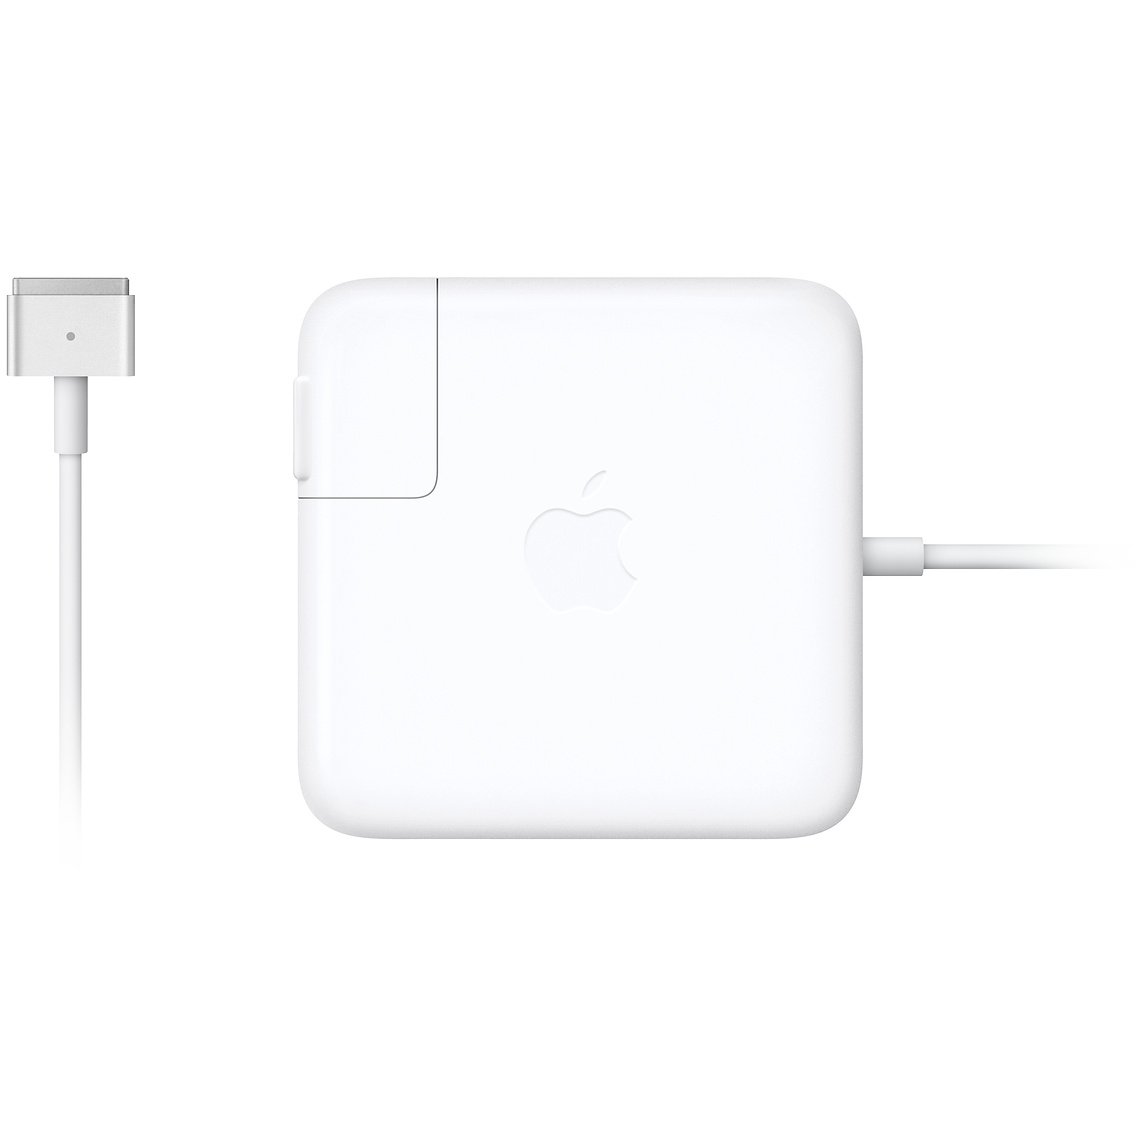 MagSafe 2 Power Adapter 60W For 13-inch MacBook Pro with Retina Display